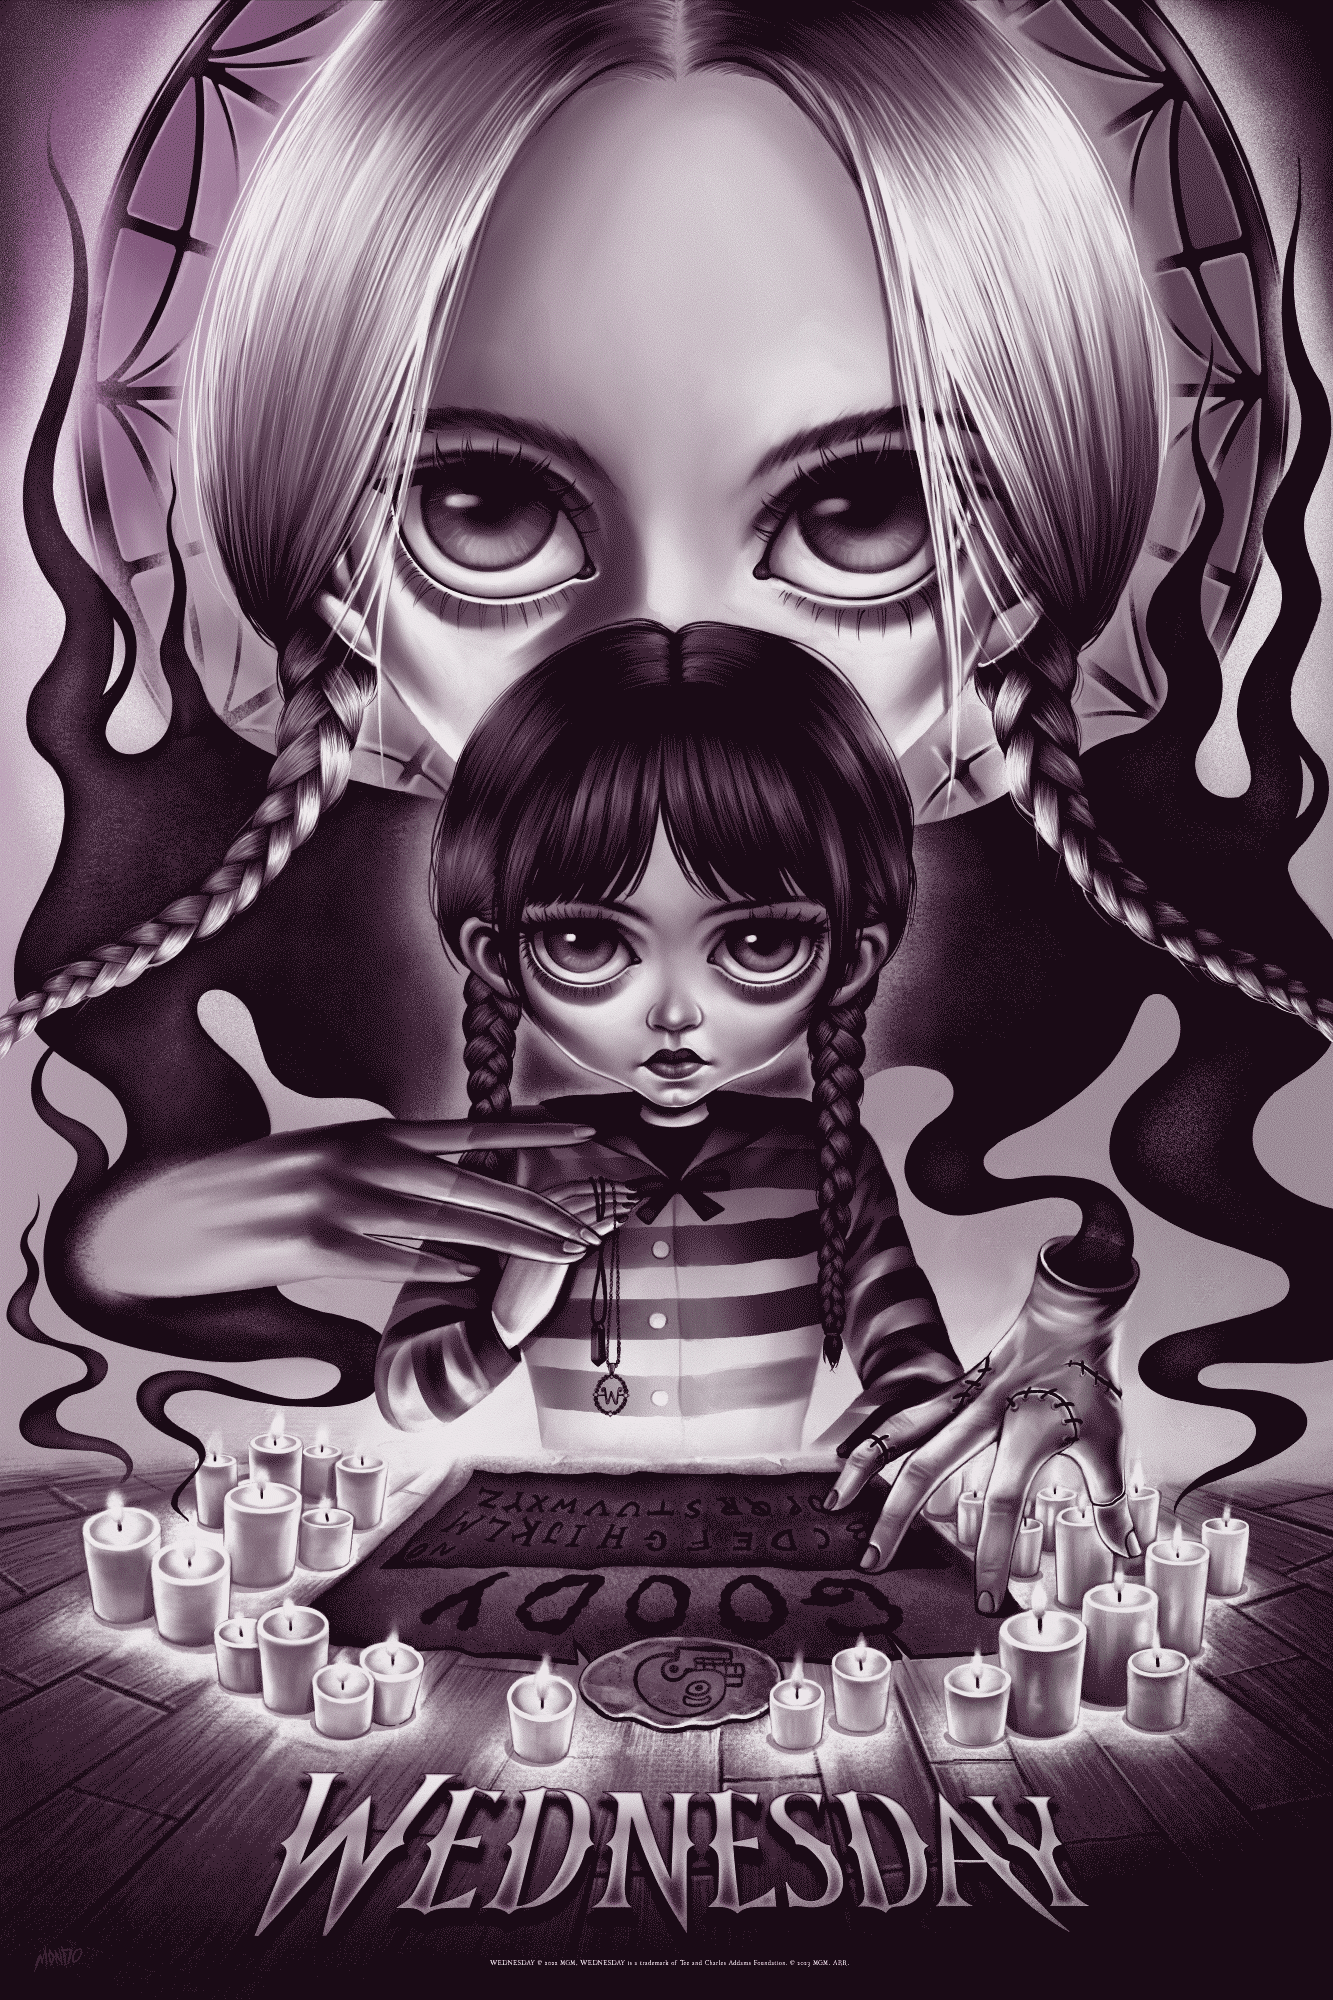 Mondo Wednesday Addams Poster featuring Wednesday Addams with Goody Addams looming behind her. 